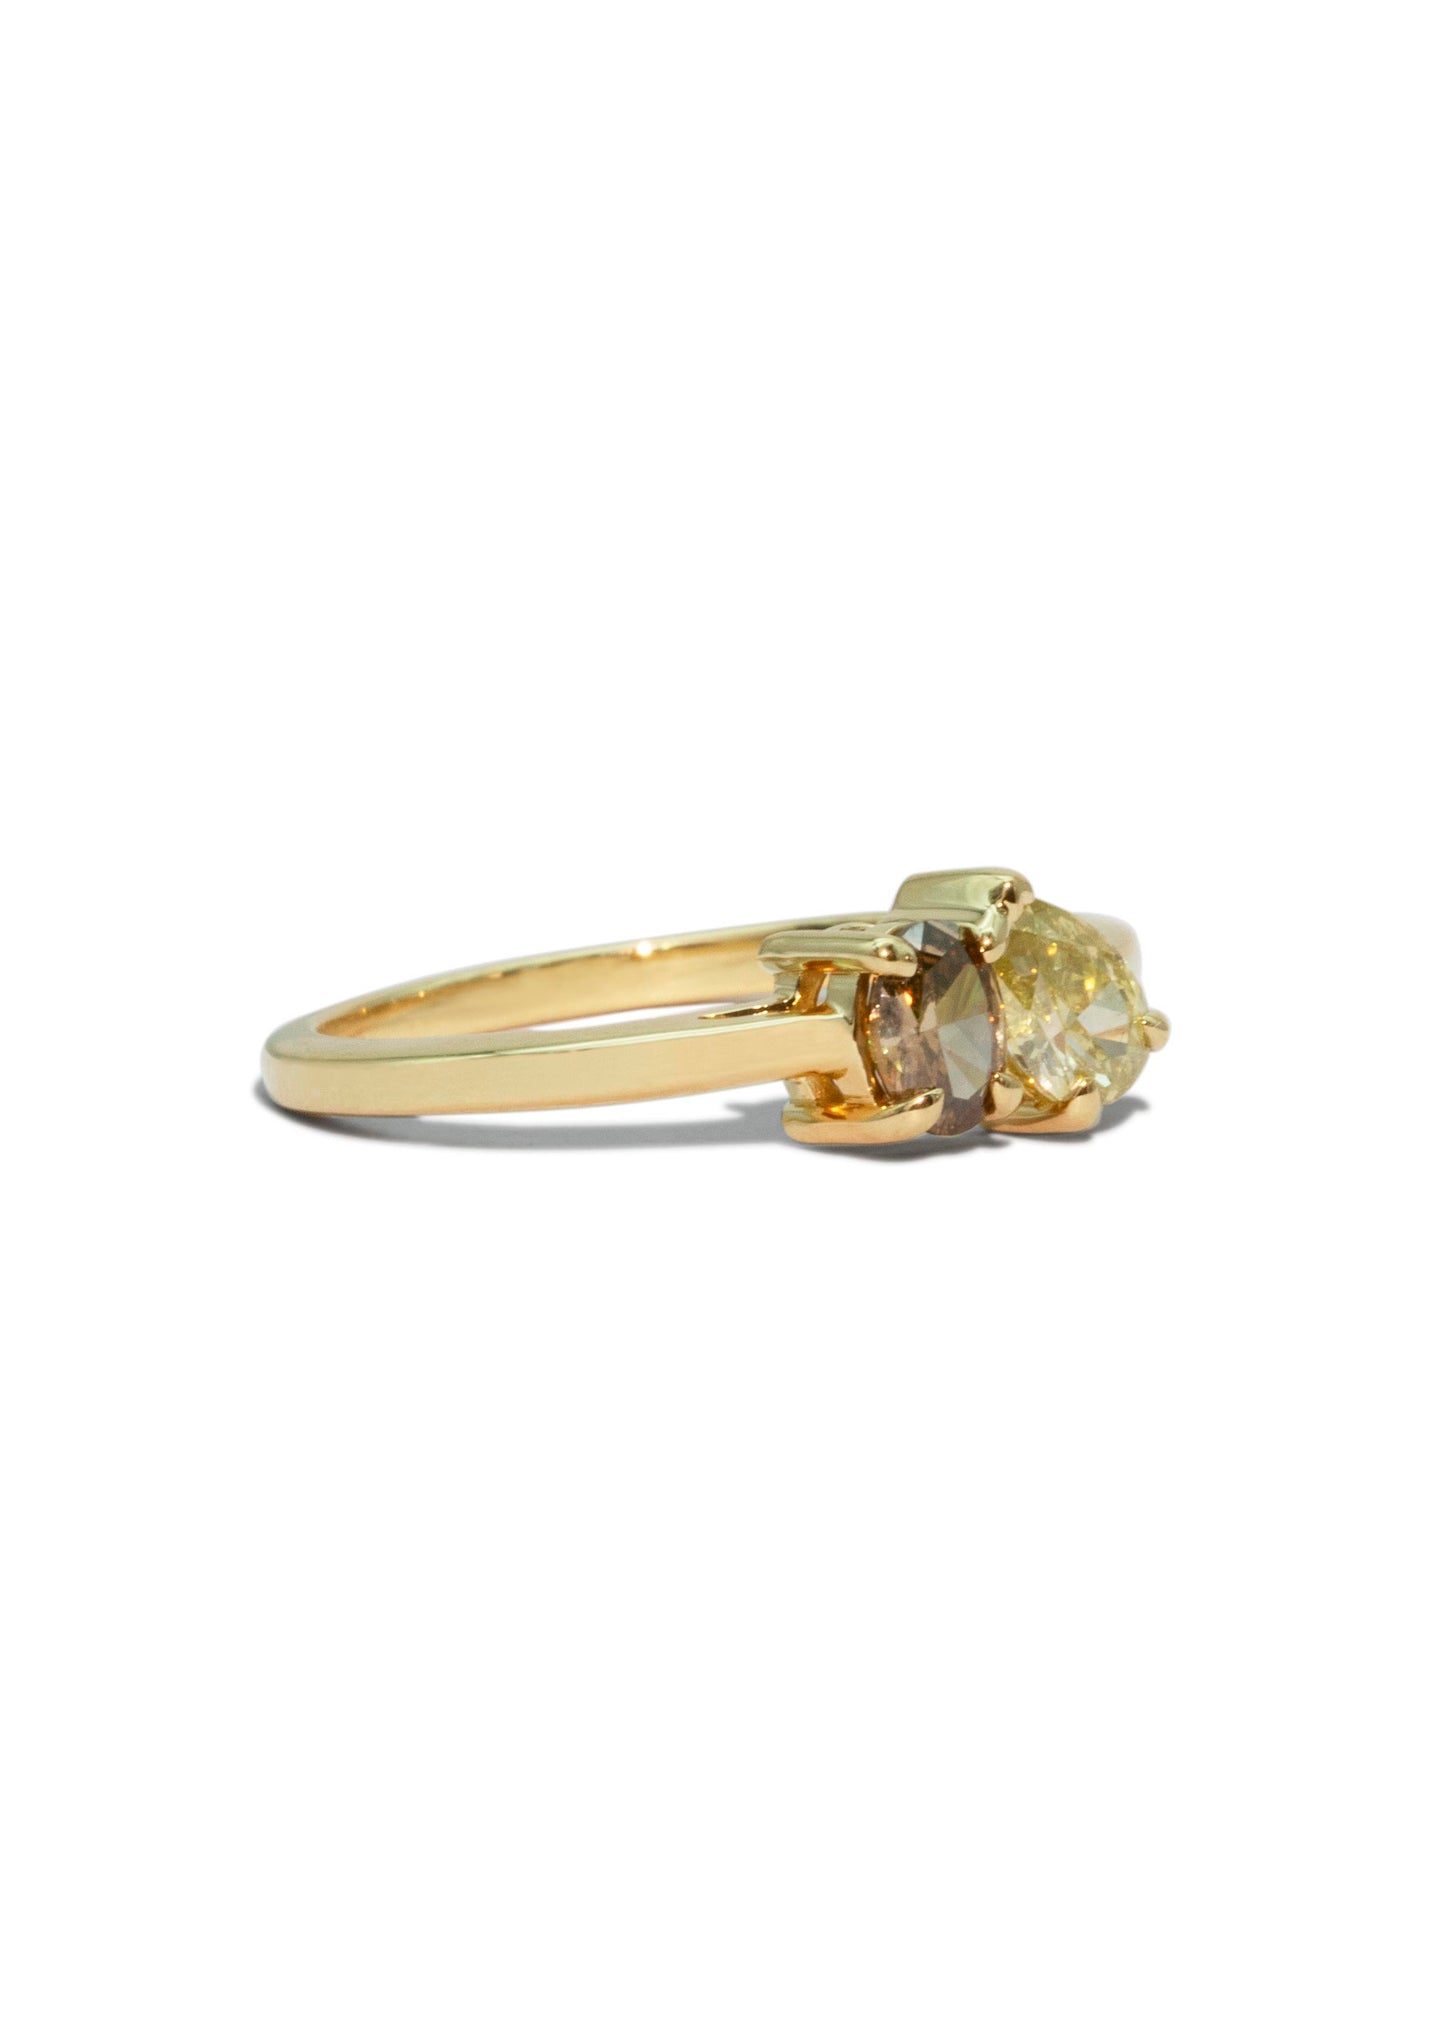 The Toi Et Moi 0.3ct Cognac Diamond and 0.37ct Champagne Diamond Ring